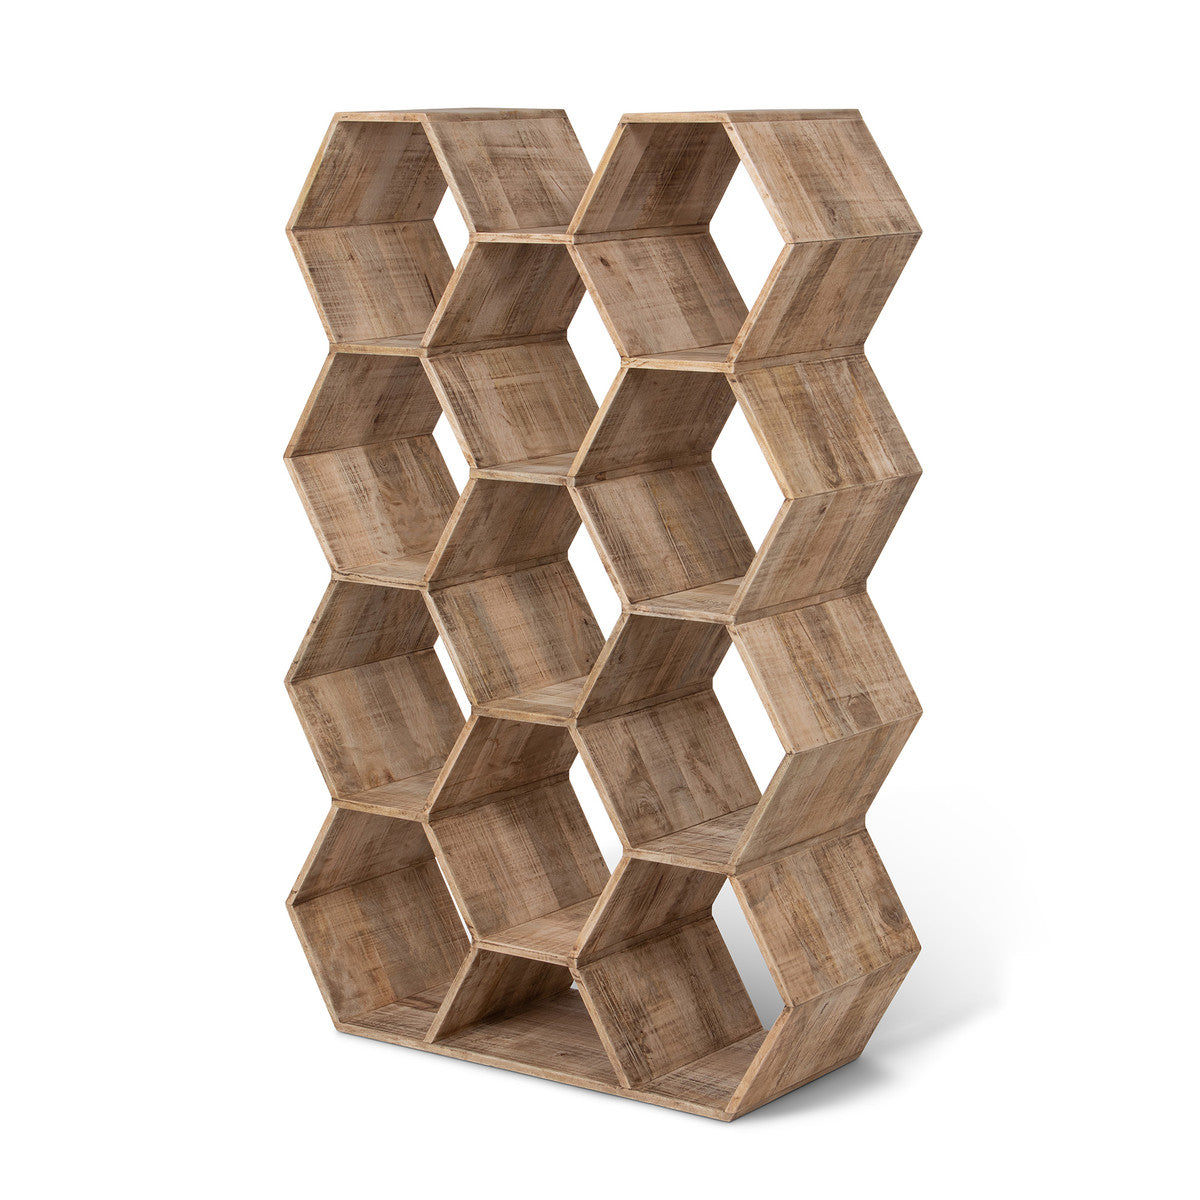 Honeycomb Wooden Etagere by Park Hill